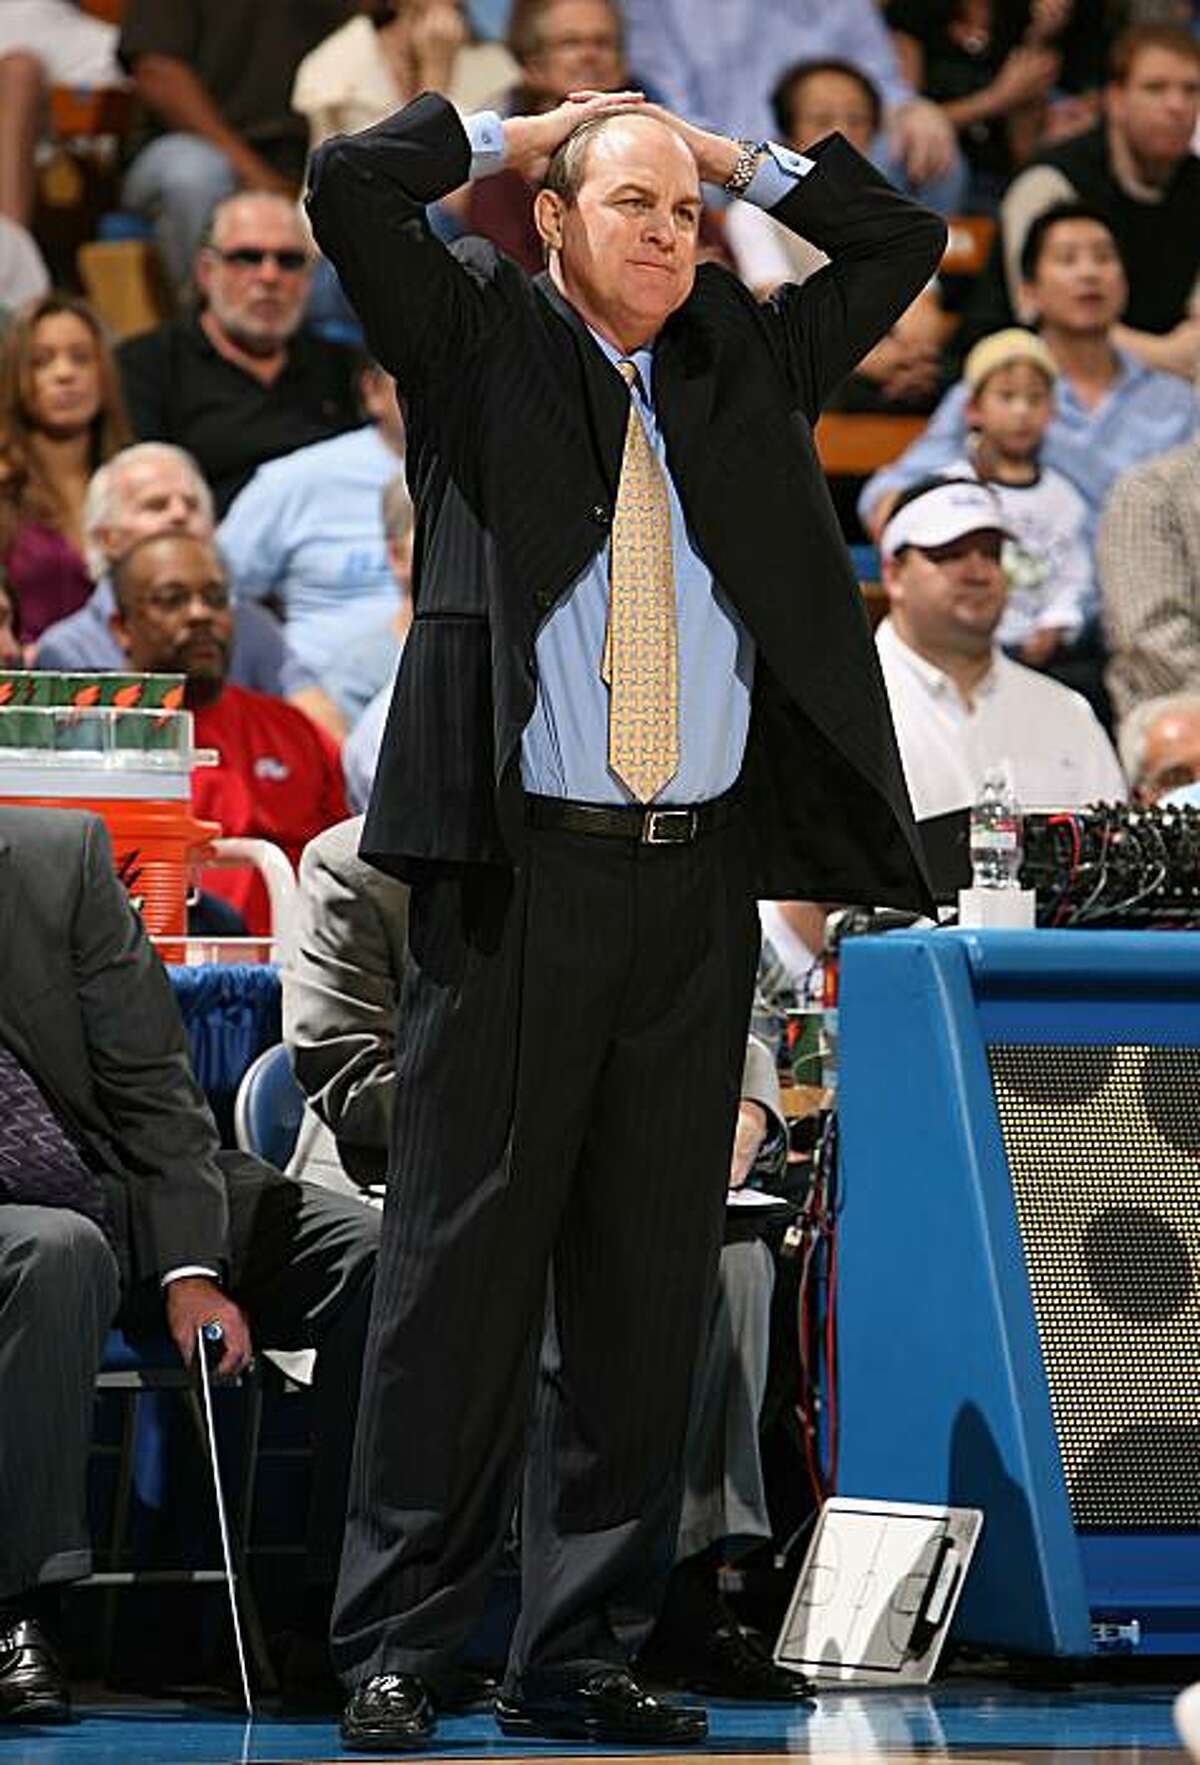 WESTWOOD, CA - JANUARY 17: Head coach Ben Howland of the UCLA Bruins reacts during the college basketball game against the Arizona State Sun Devils at Pauley Pavilion on January 17, 2009 in Westwood, California. (Photo by Christian Petersen/Getty Images)